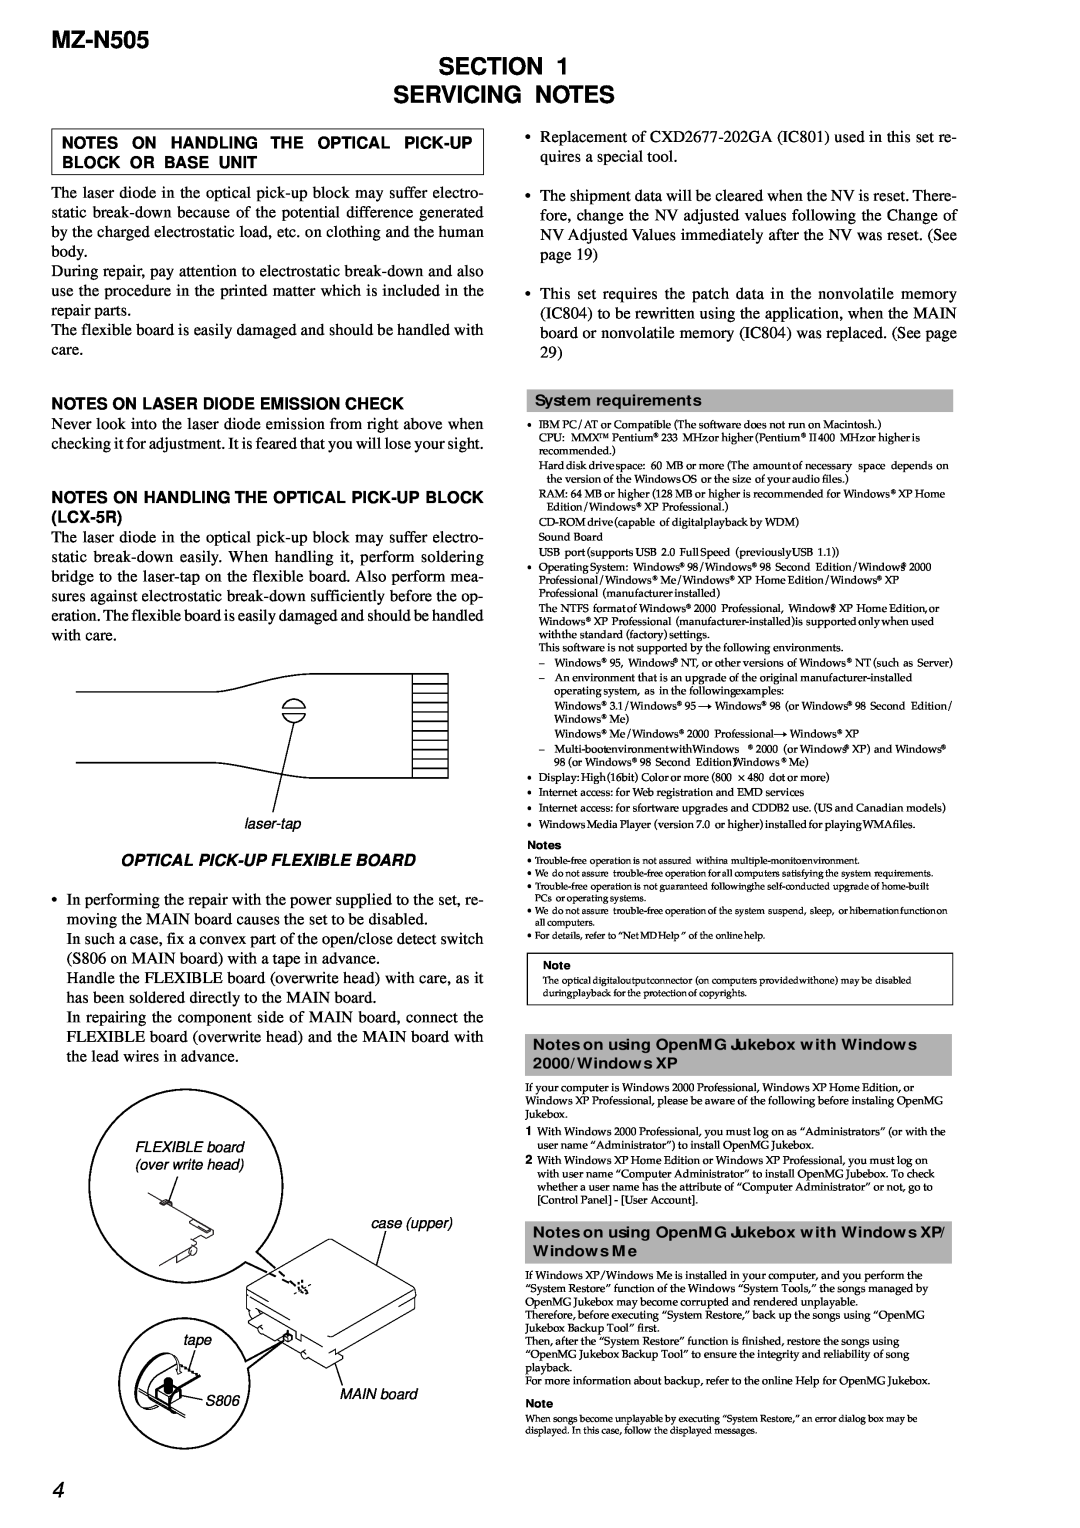 Sony service manual MZ-N505 SECTION SERVICING NOTES, Notes On Laser Diode Emission Check, Optical Pick-Upflexible Board 